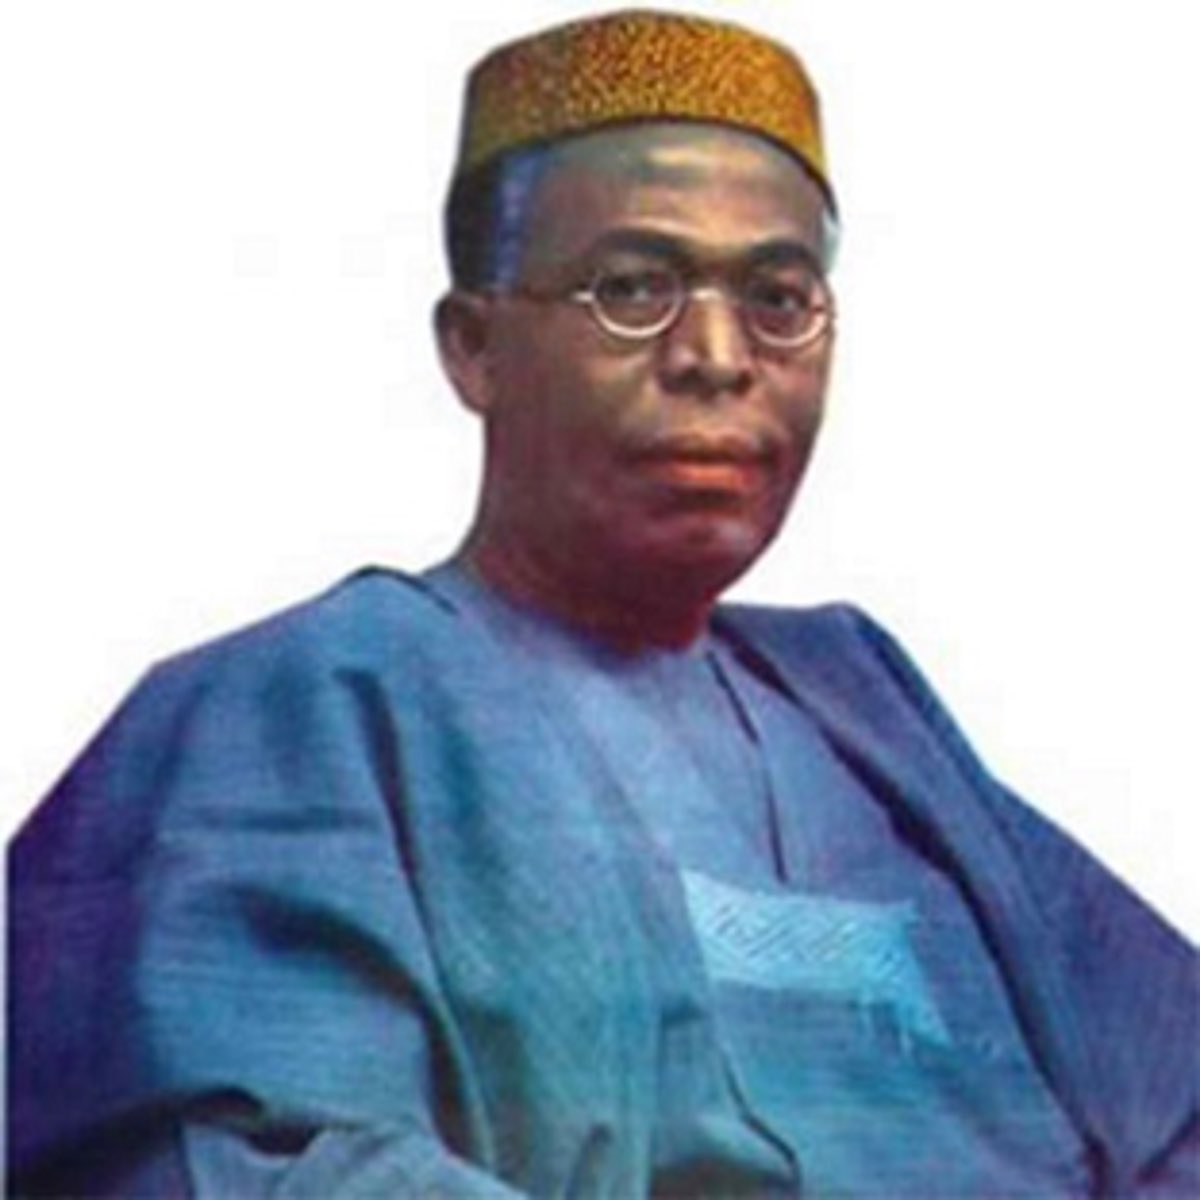 Awolowo introduced Tribalism into Nigerian politics. Awolowo was meant to declare Oduduwa Republic after Ojukwu released him but because of his selfish personal interest to become President of Nigeria, he joined forces with Gowon and fought Biafra.Thread!1/